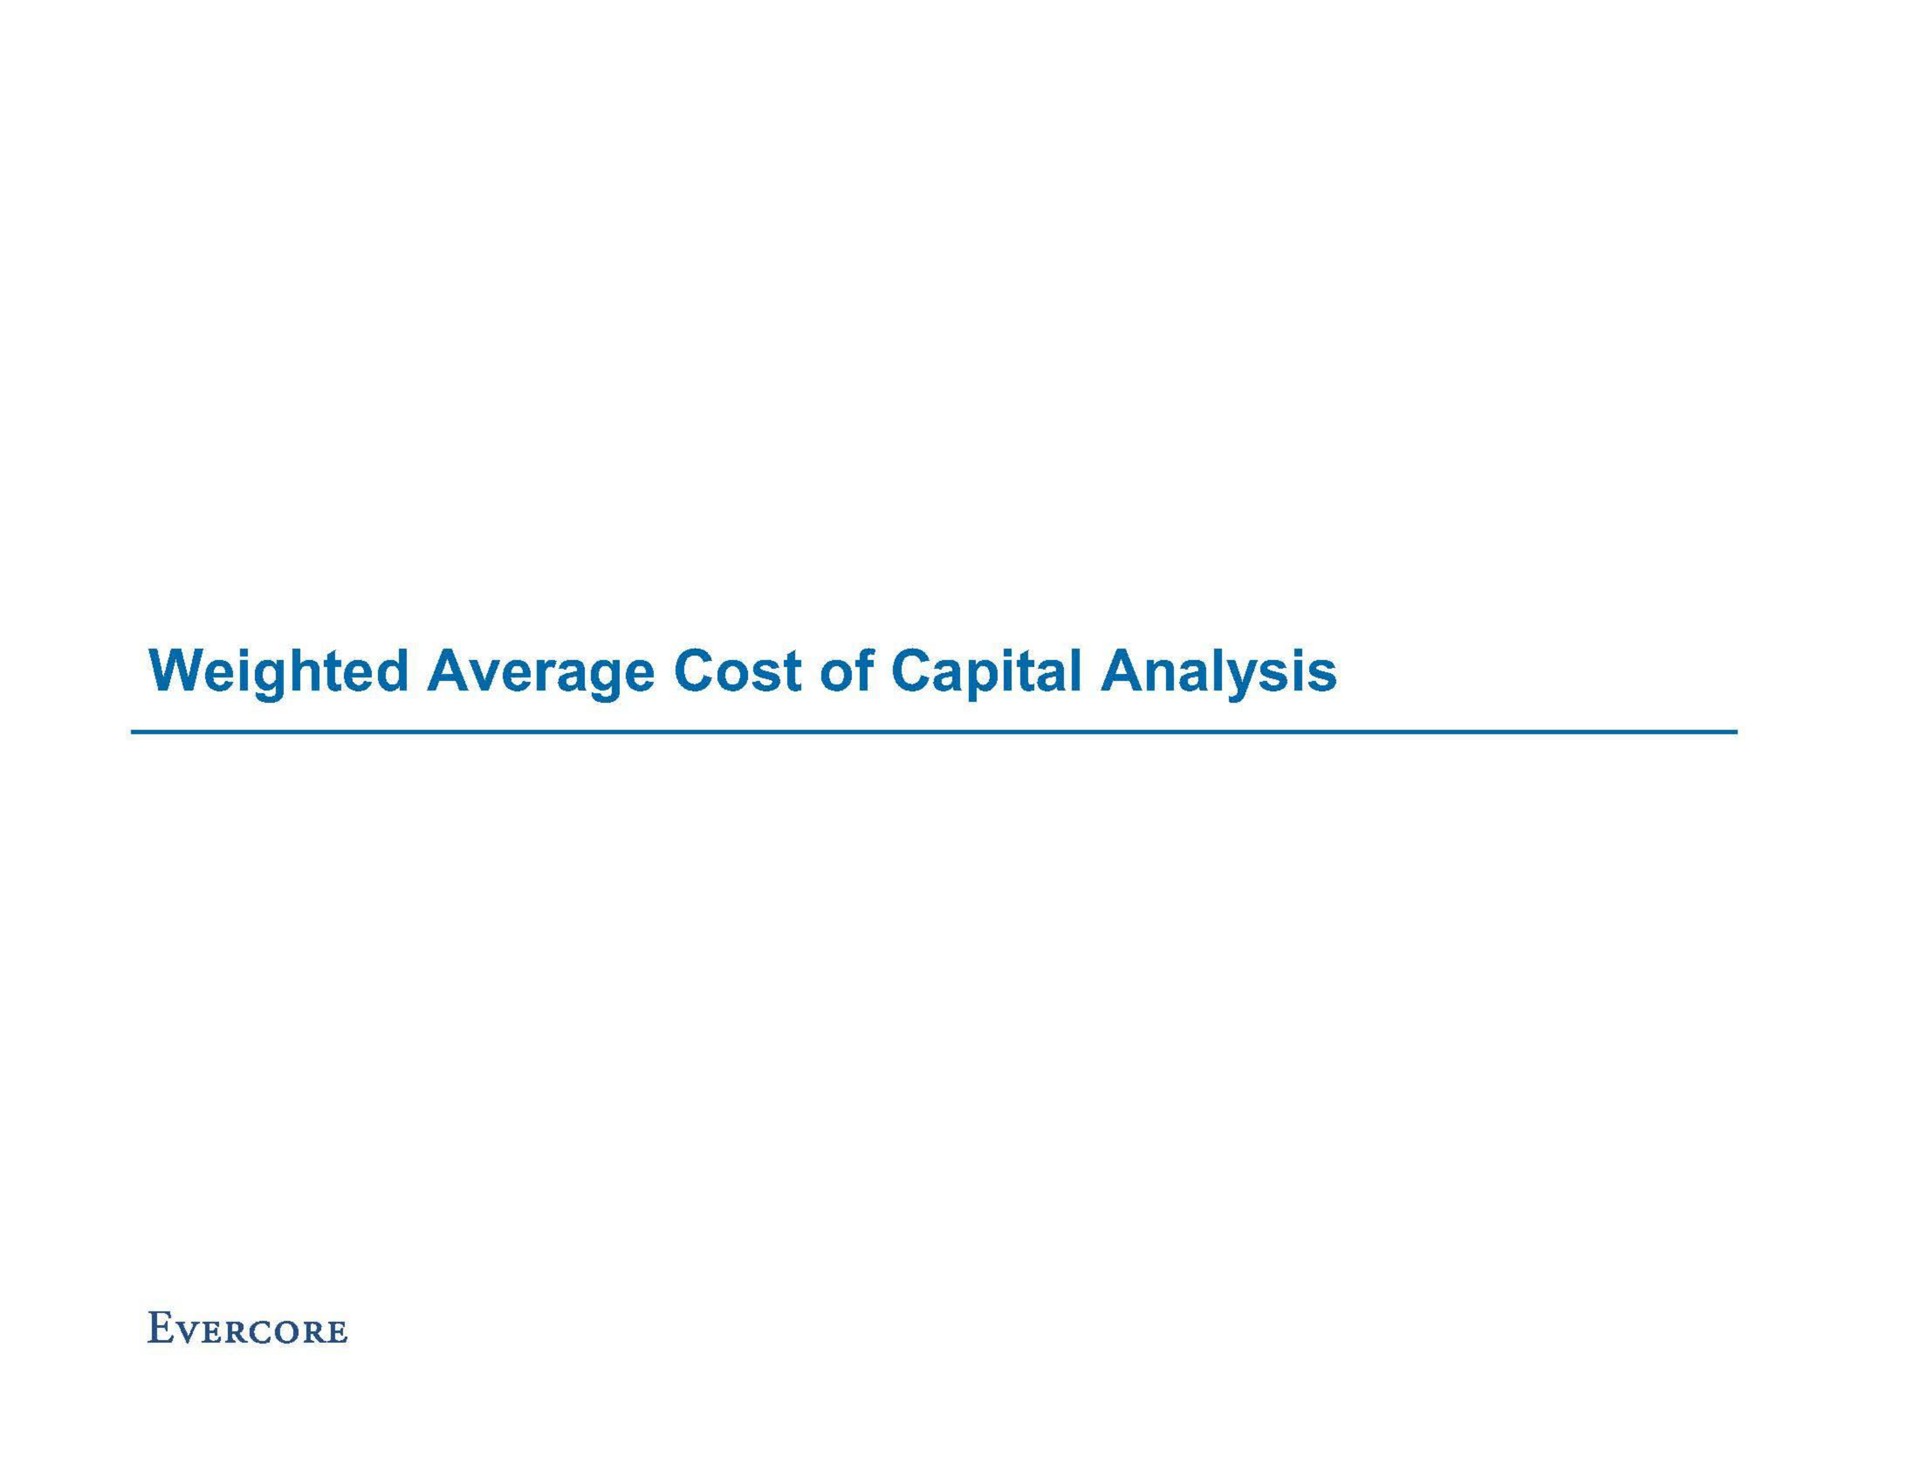 weighted average cost of capital analysis | Evercore